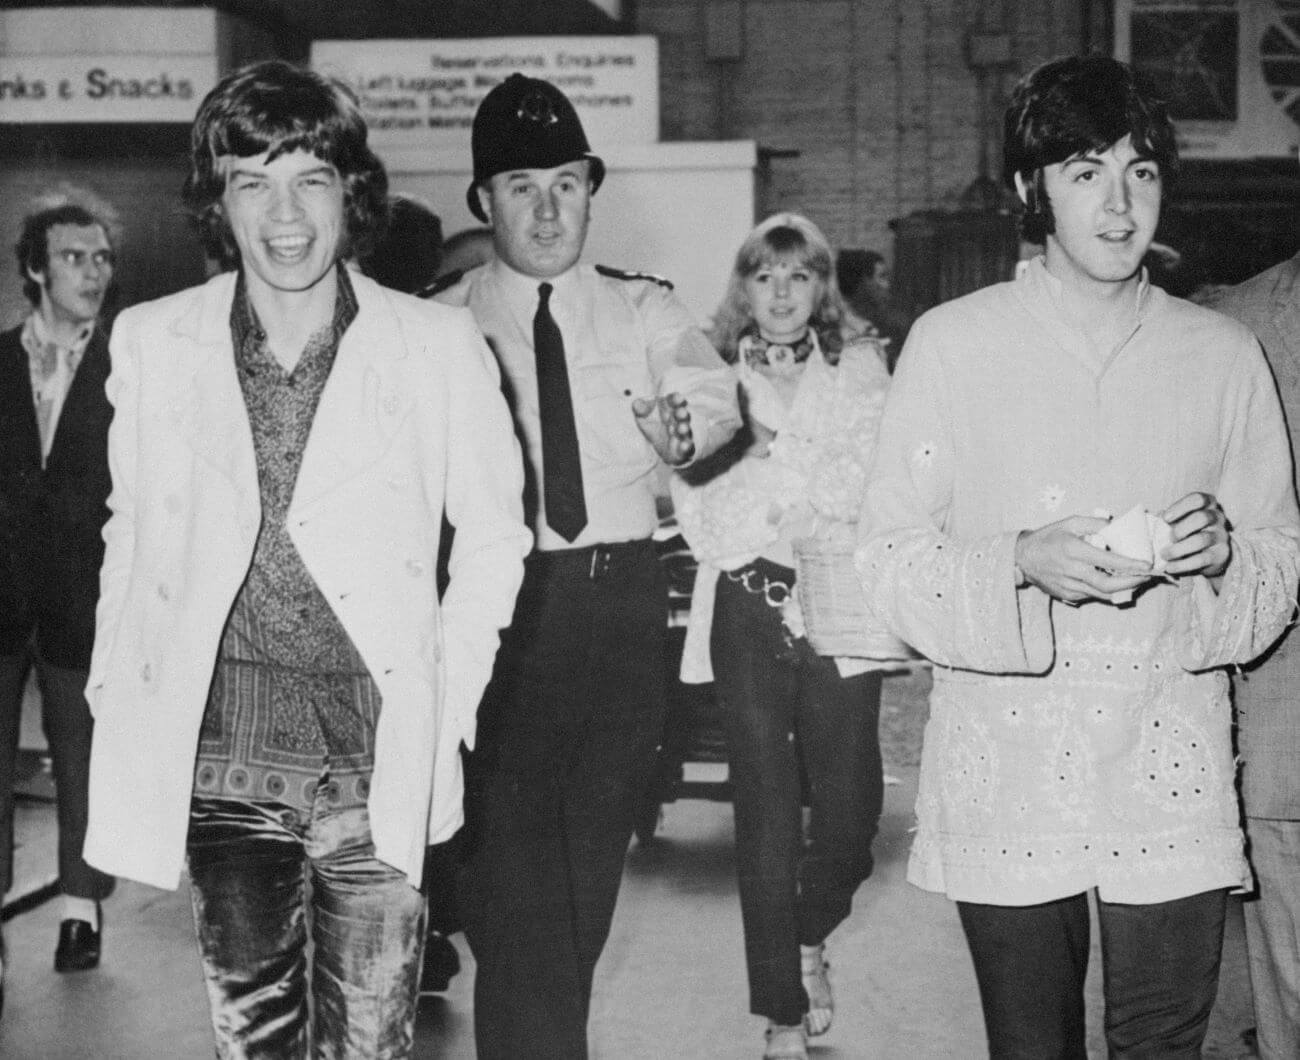 A black and white picture of Mick Jagger and Paul McCartney walking ahead of a police officer.